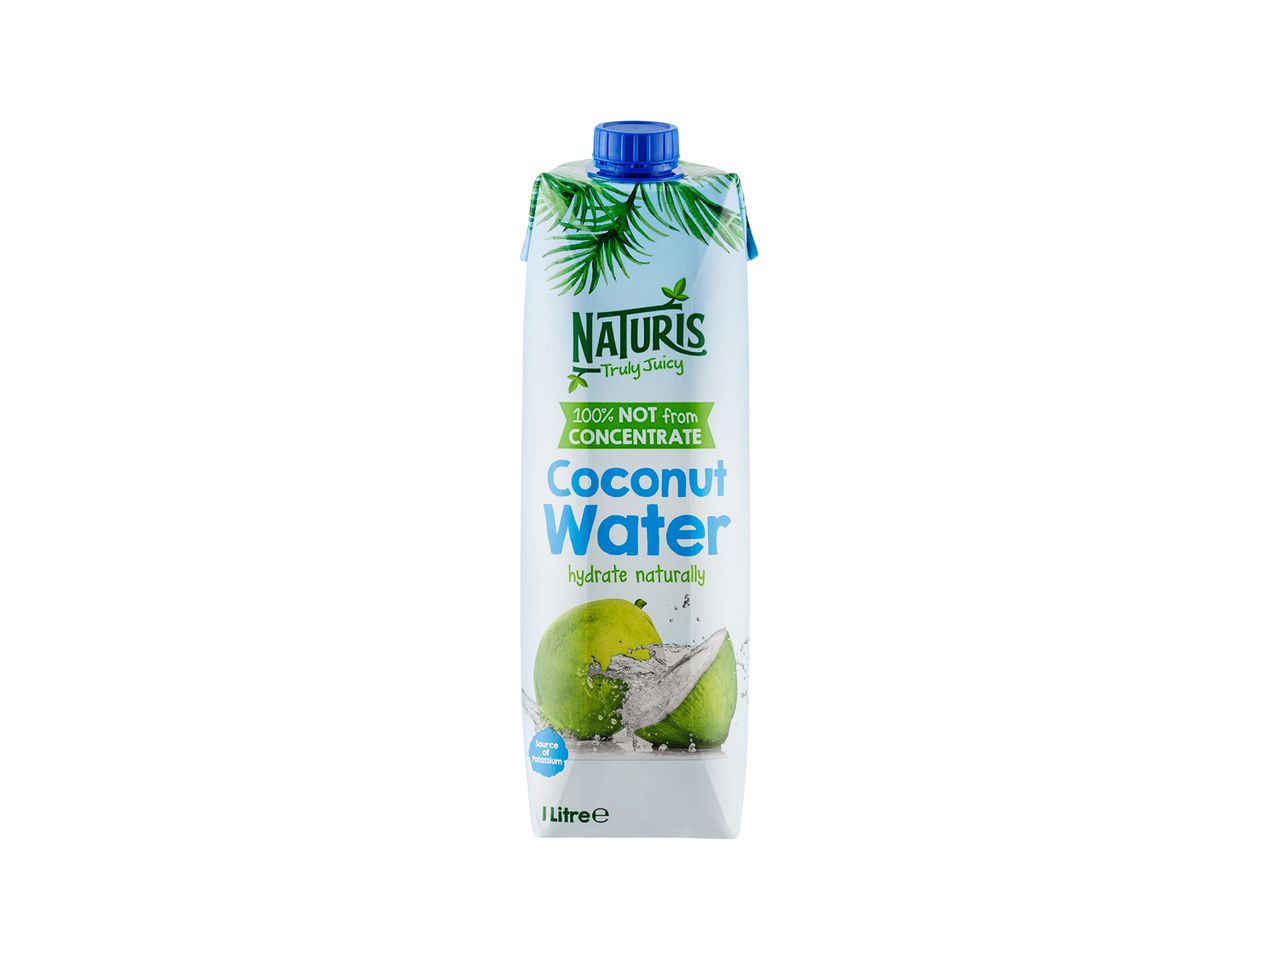 Go to full screen view: Coconut Water - Image 1